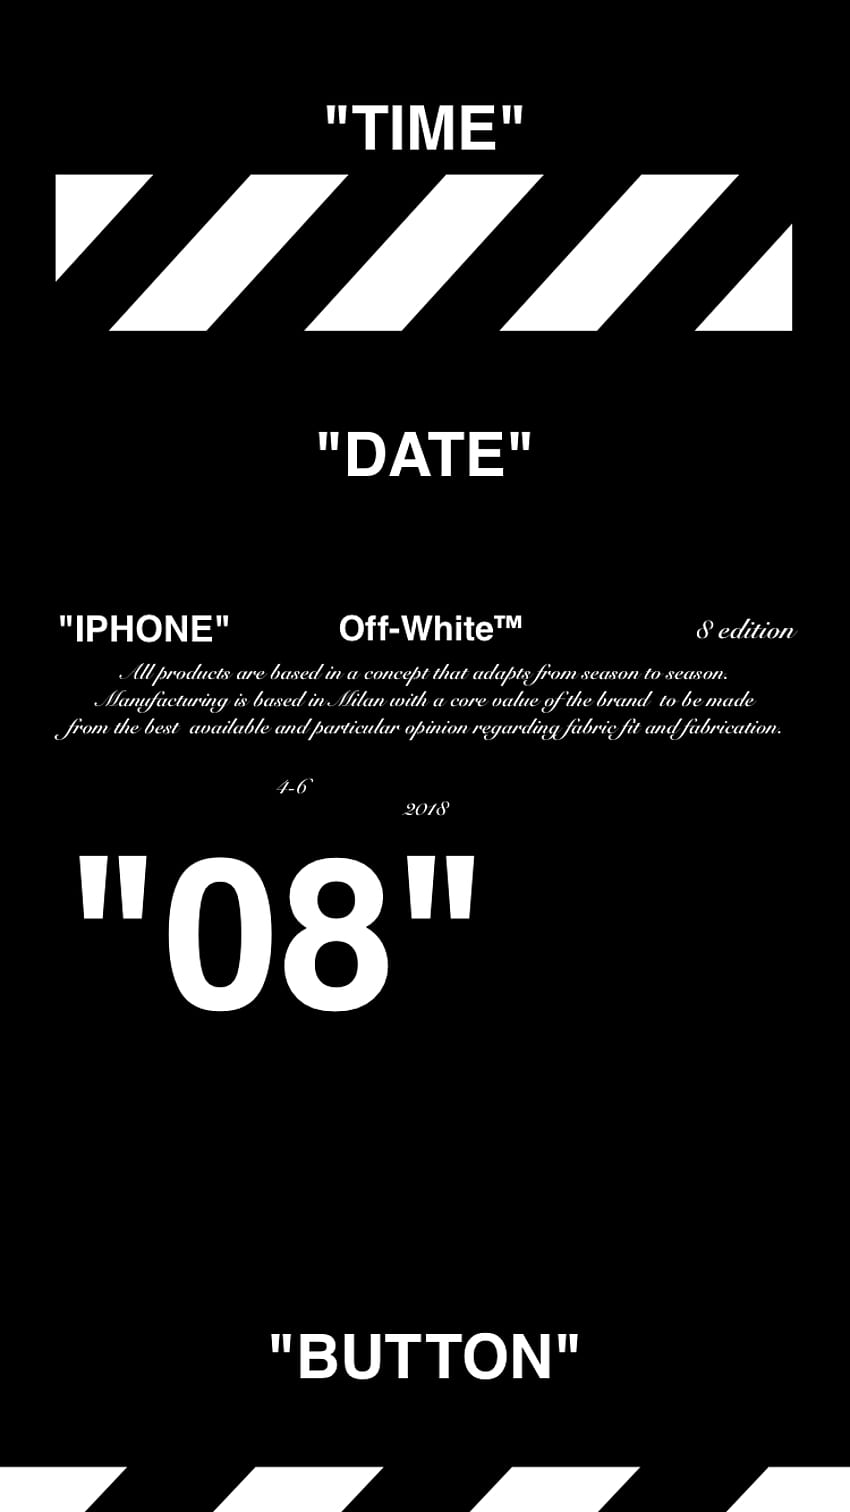 Off White™“IPHONE” ”8” “” ”壁紙“ “OFFWHITE” 18 4 10 11, OFF-WHITE HD phone wallpaper